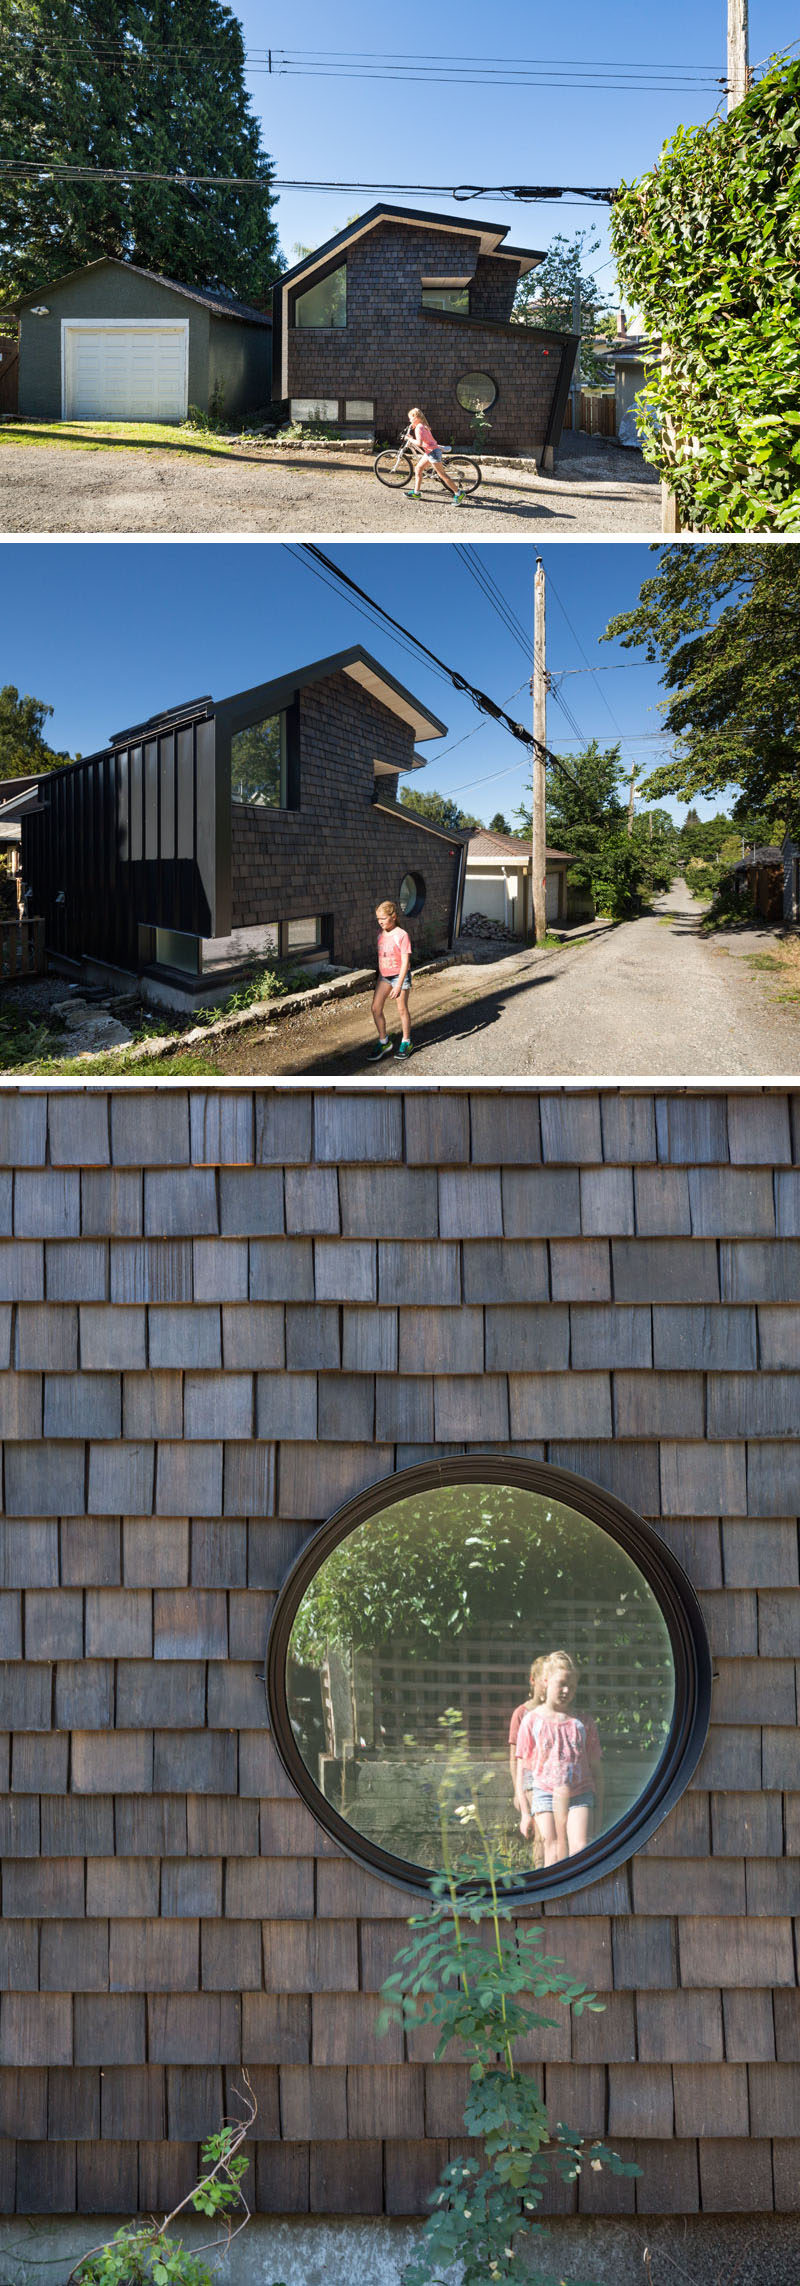 Campos Studio have designed a shingle-covered, modern laneway house in Vancouver, Canada. #LanewayHouse #ModernArchitecture #SmallHouse